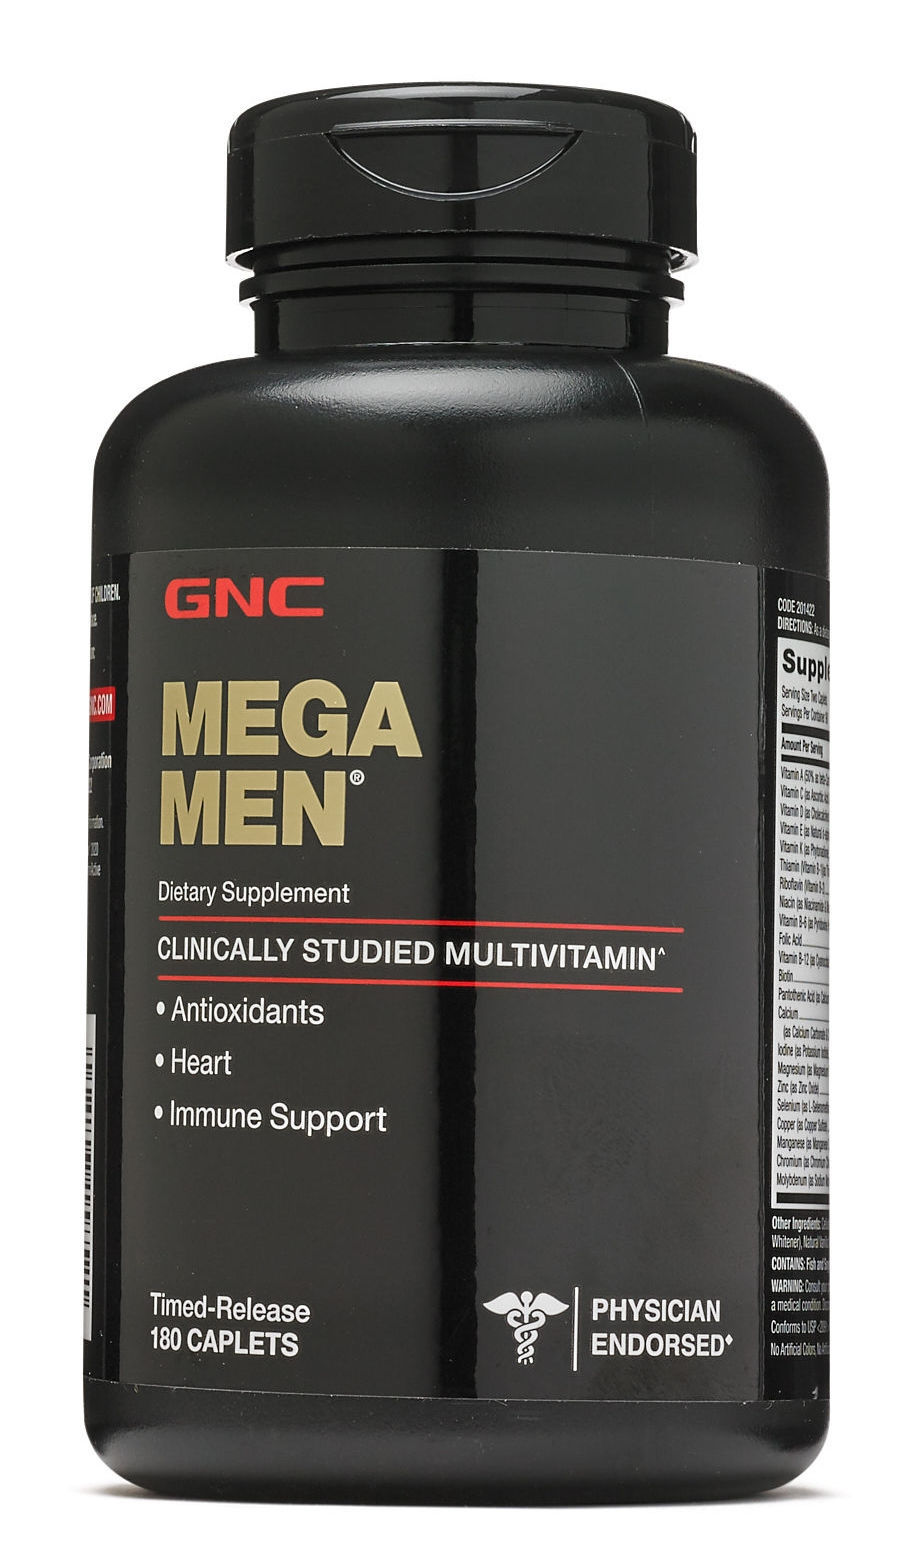 gnc vitamins and supplements